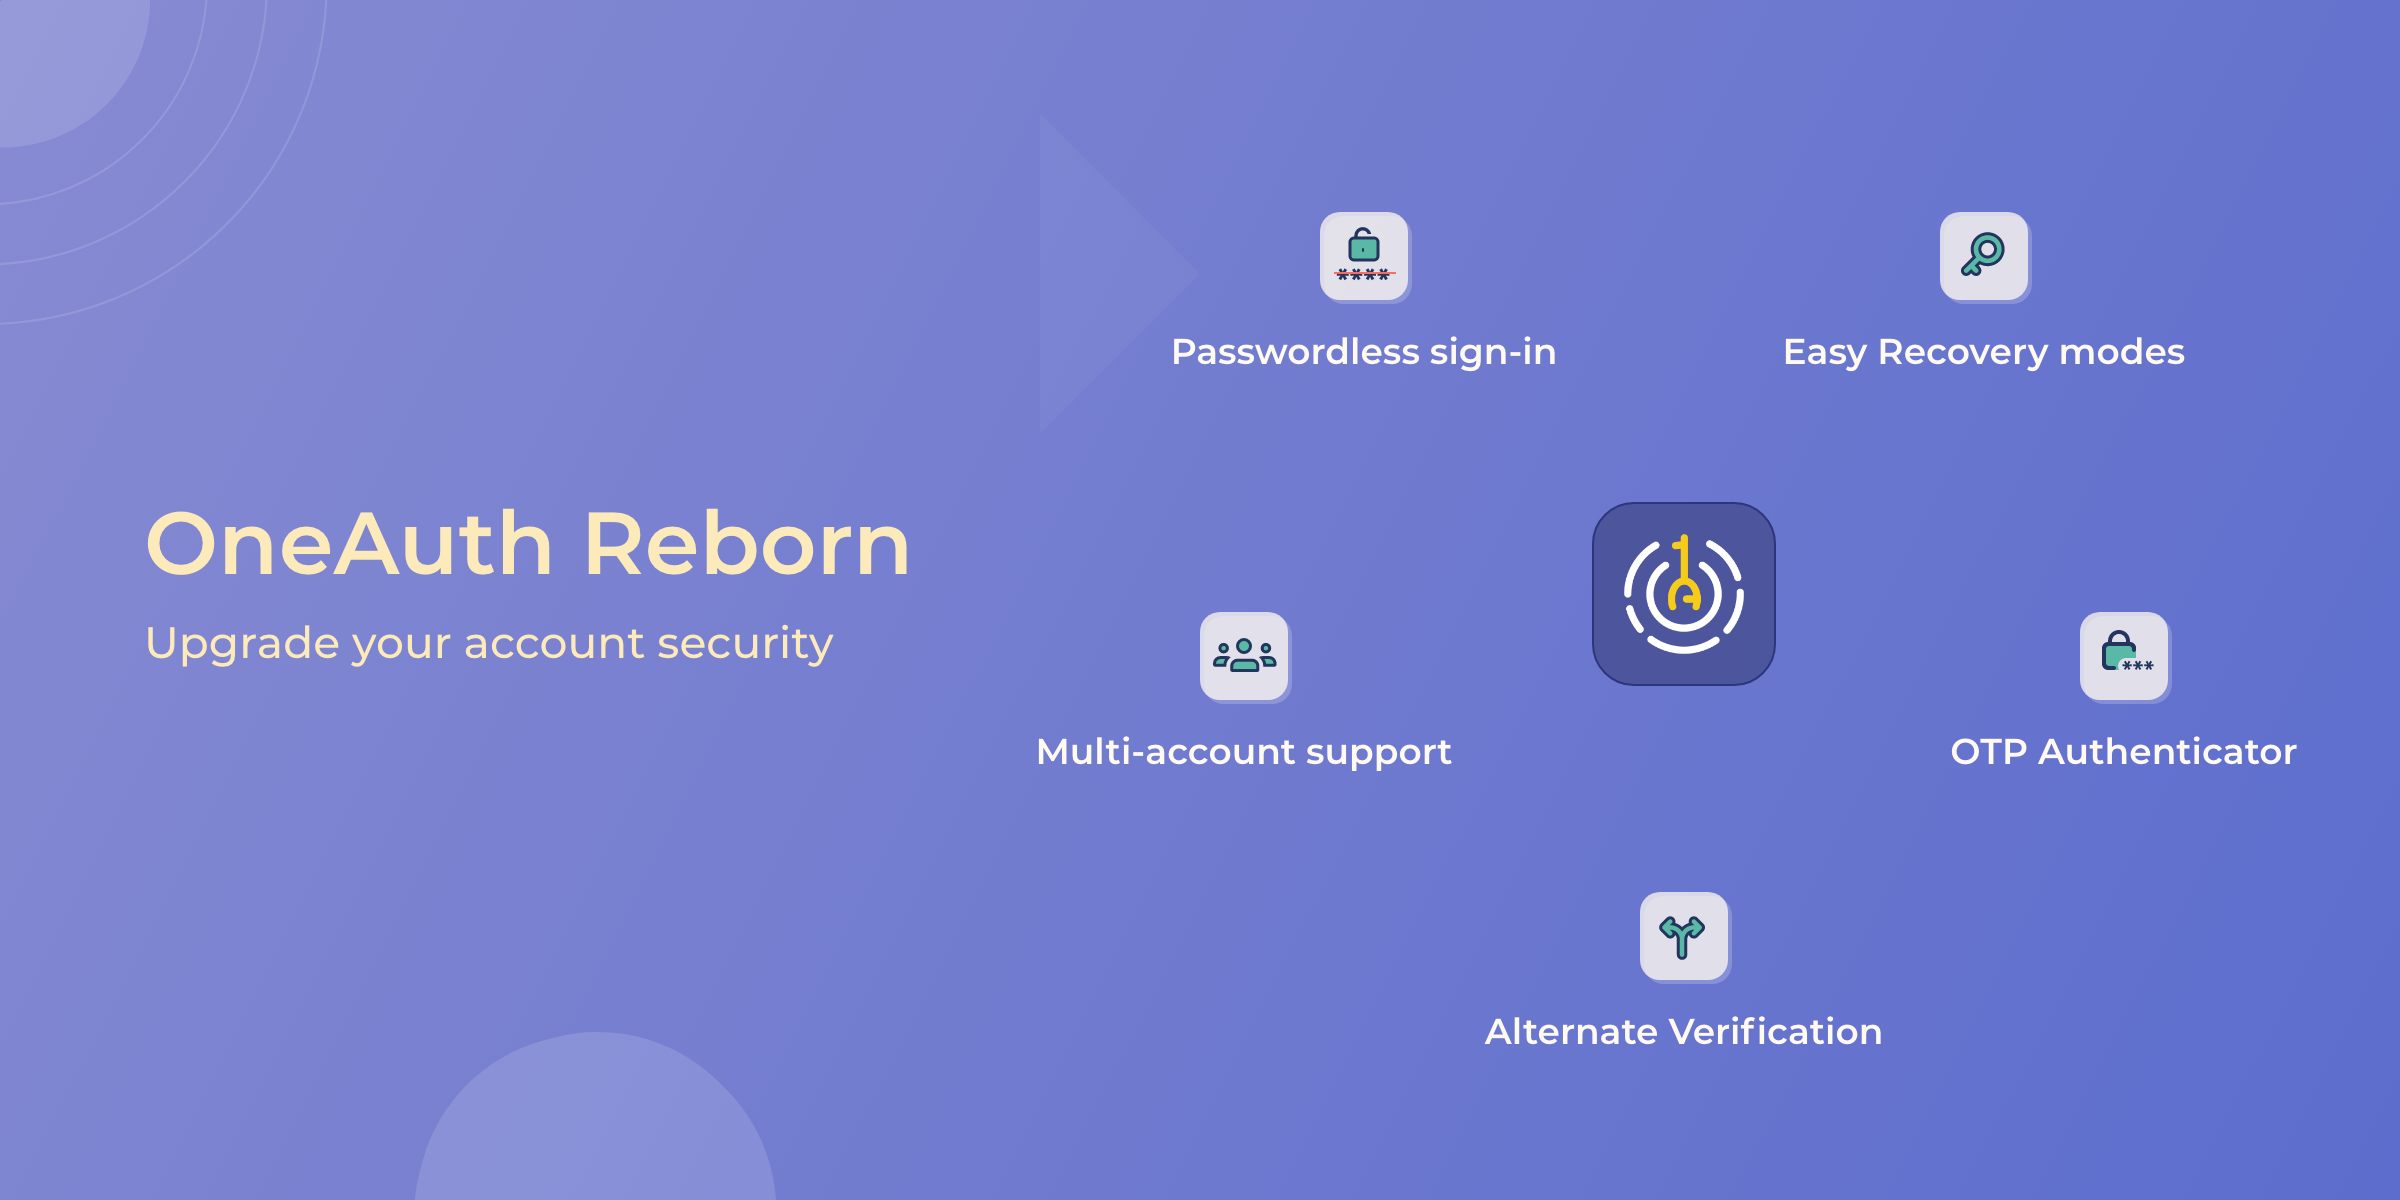 OneAuth Reborn: Upgrade Your Account Security